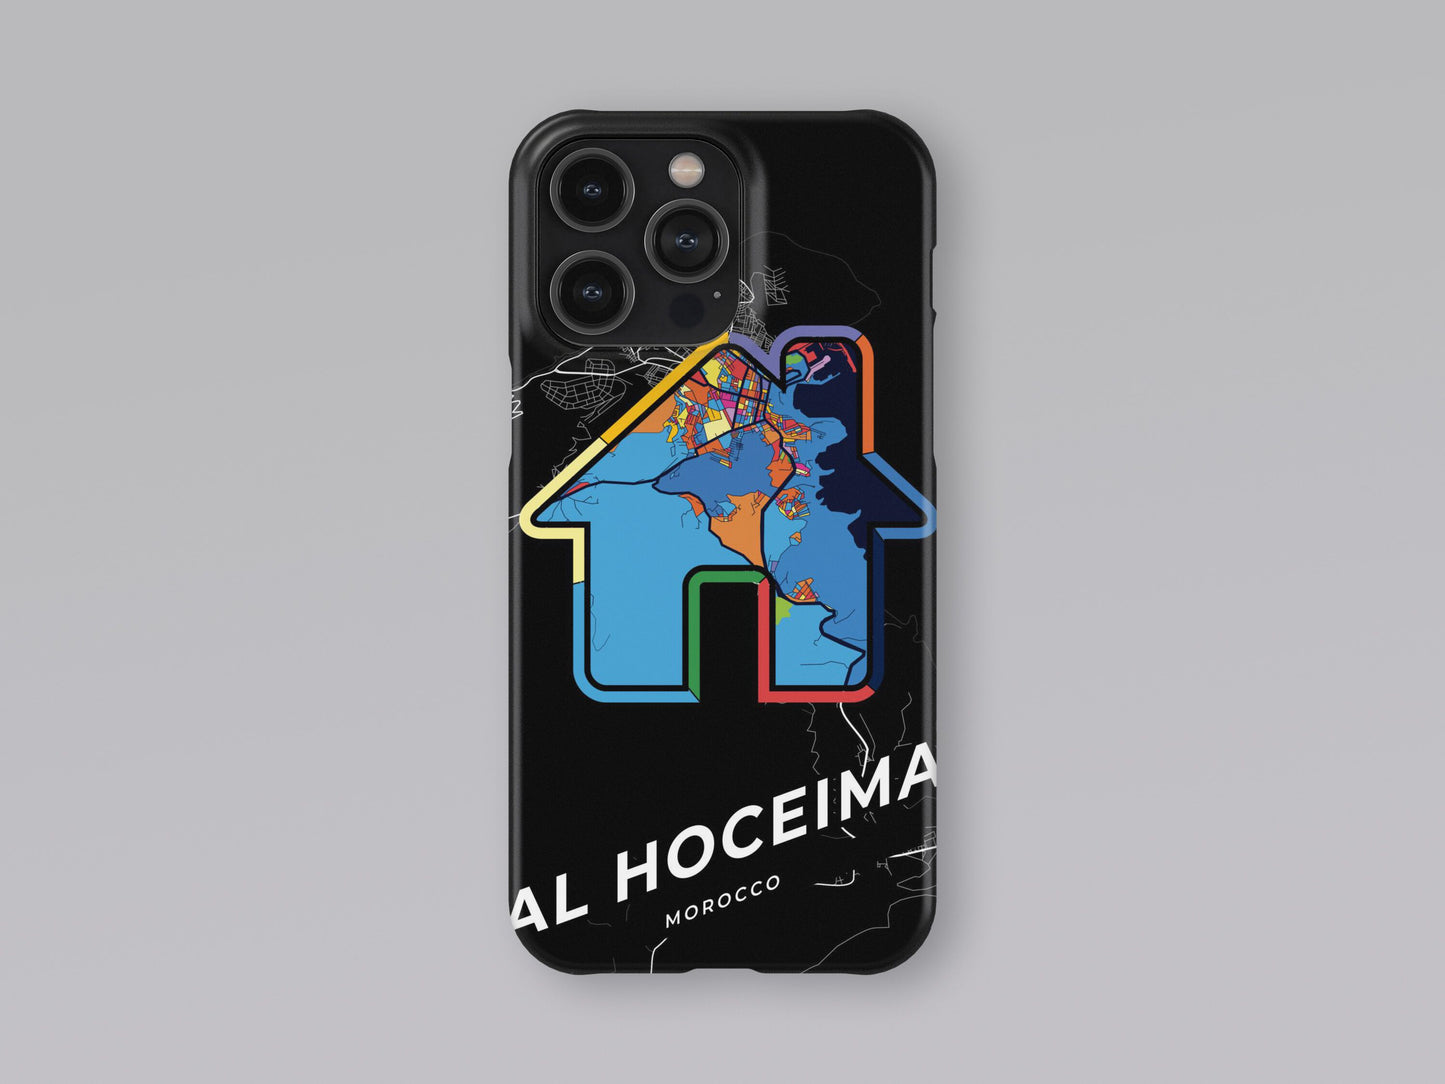 Al Hoceima Morocco slim phone case with colorful icon. Birthday, wedding or housewarming gift. Couple match cases. 3